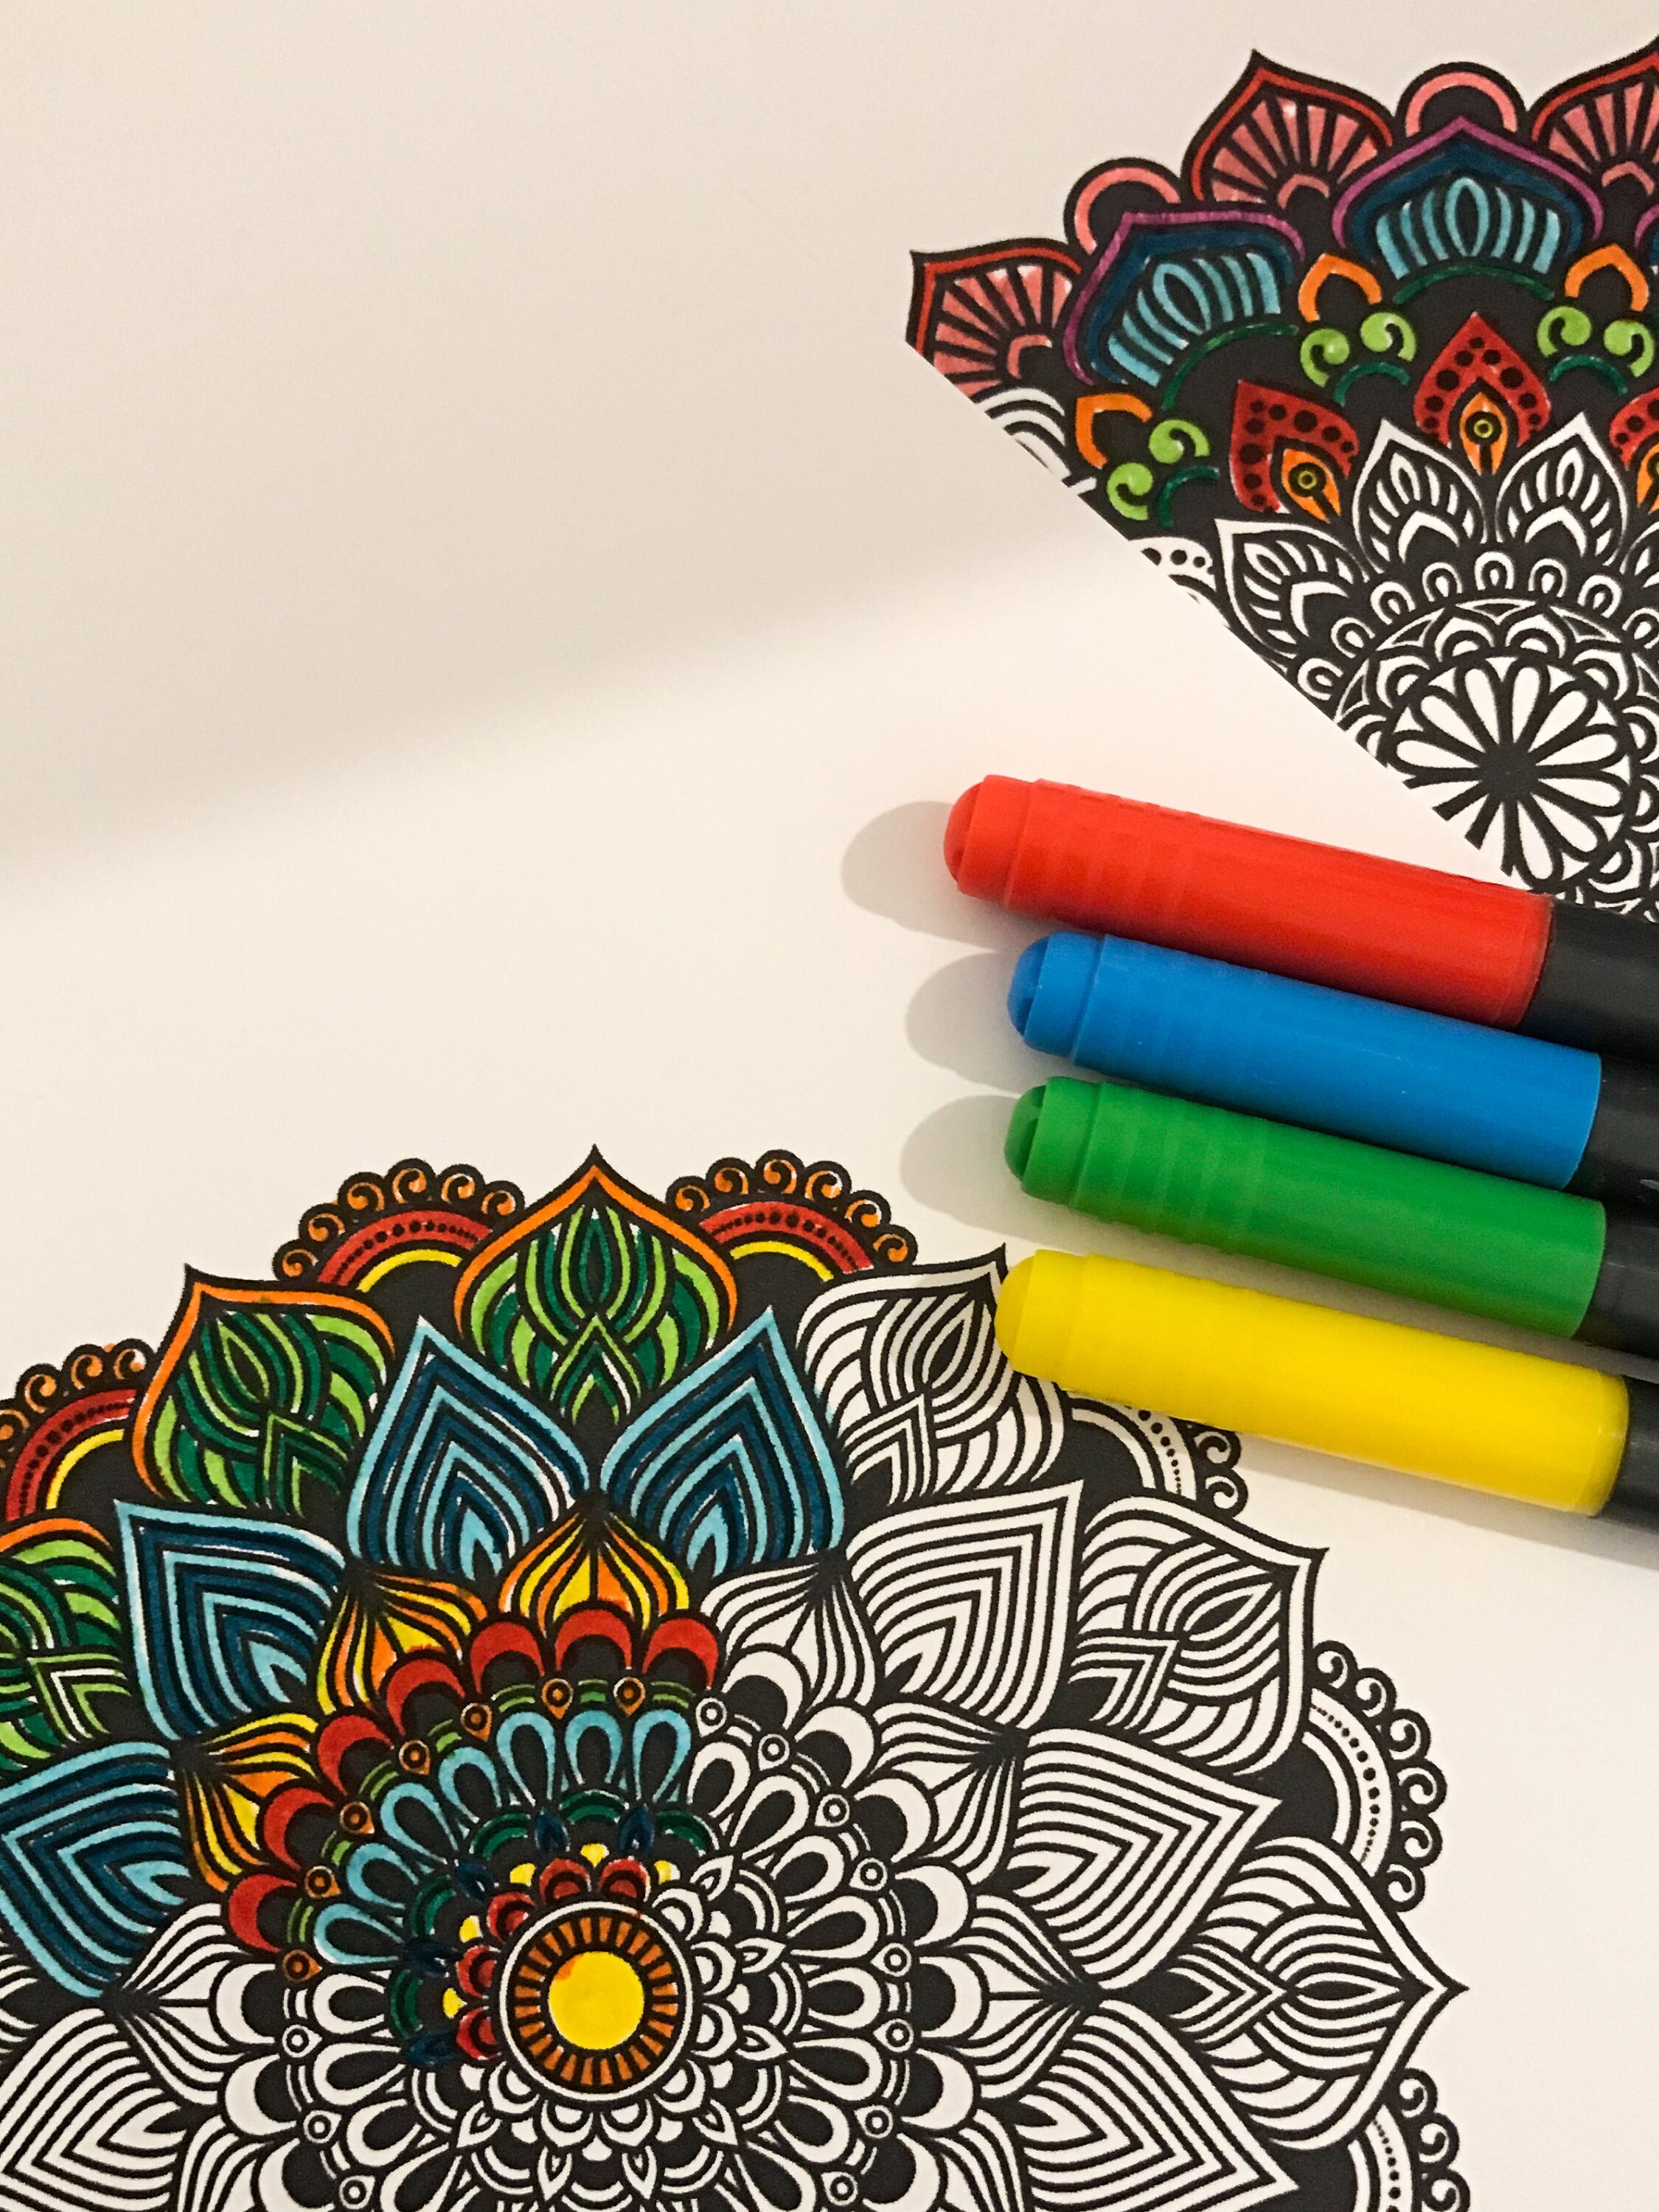 50 Mandala Colouring Pages // Adult Colouring // Complex Colouring ...